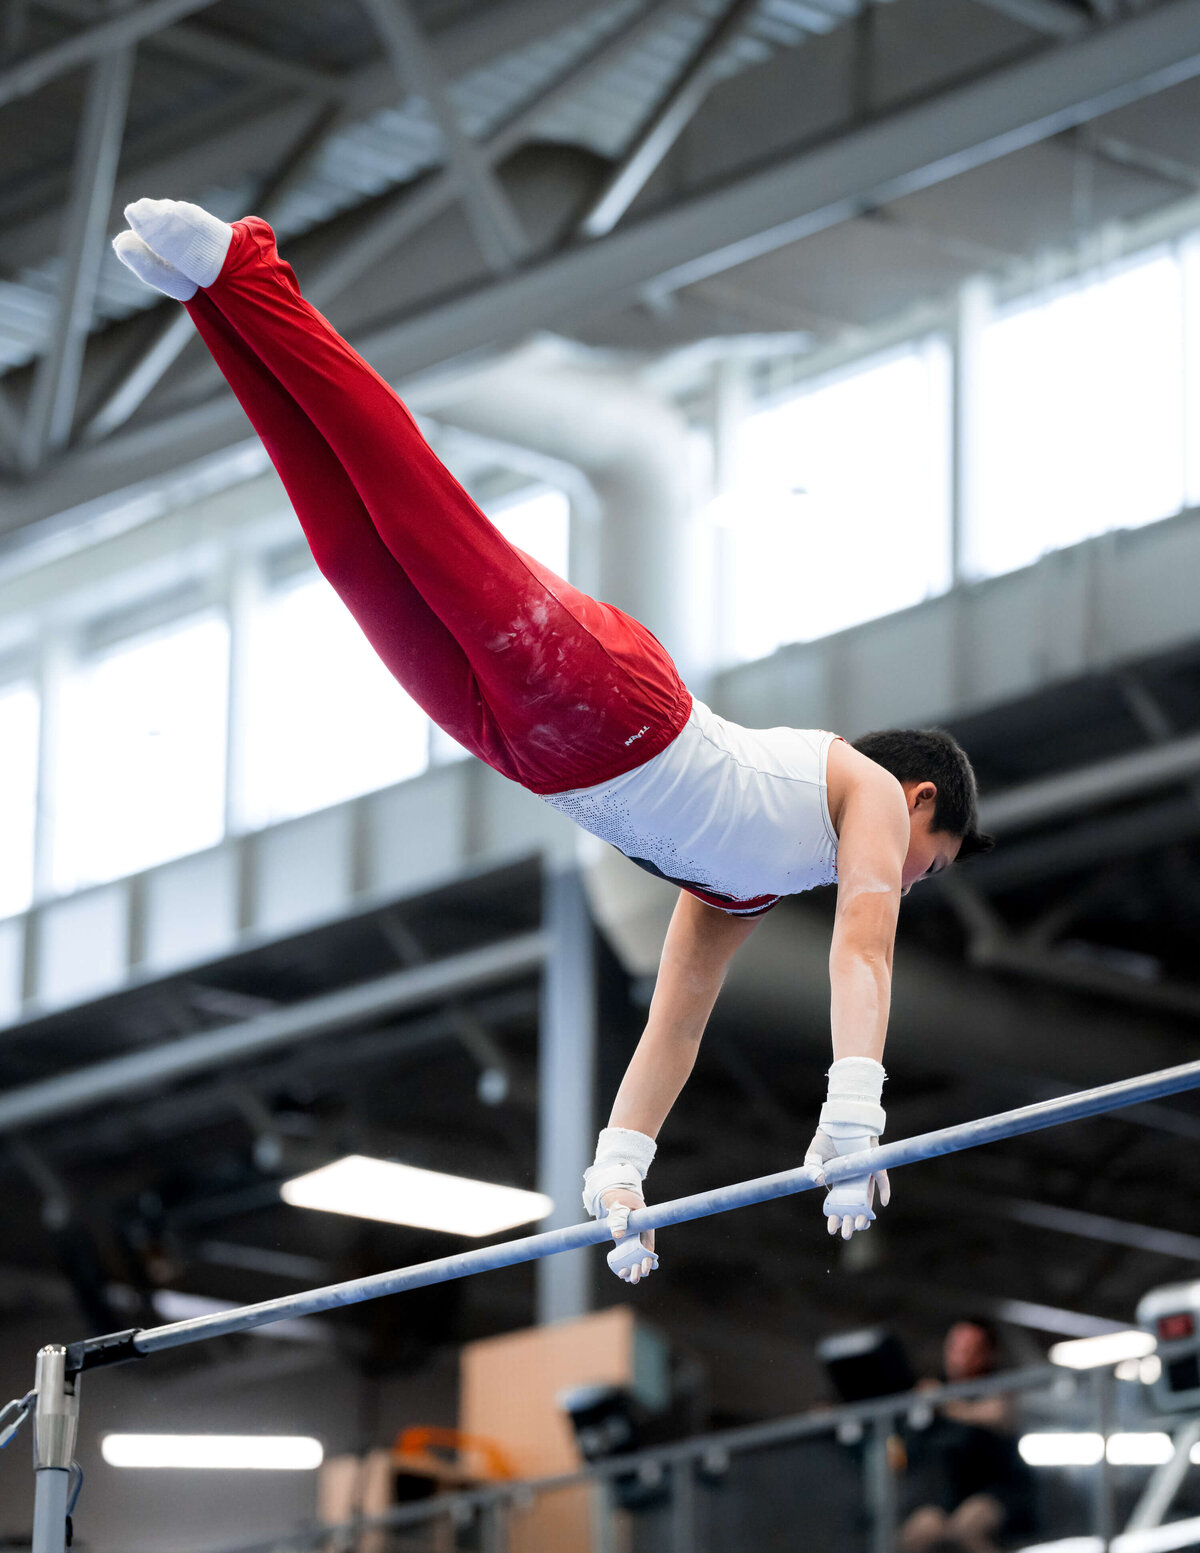 Photo by Luke O'Geil taken at the 2023 inaugural Grizzly Classic men's artistic gymnastics competitionA1_01174